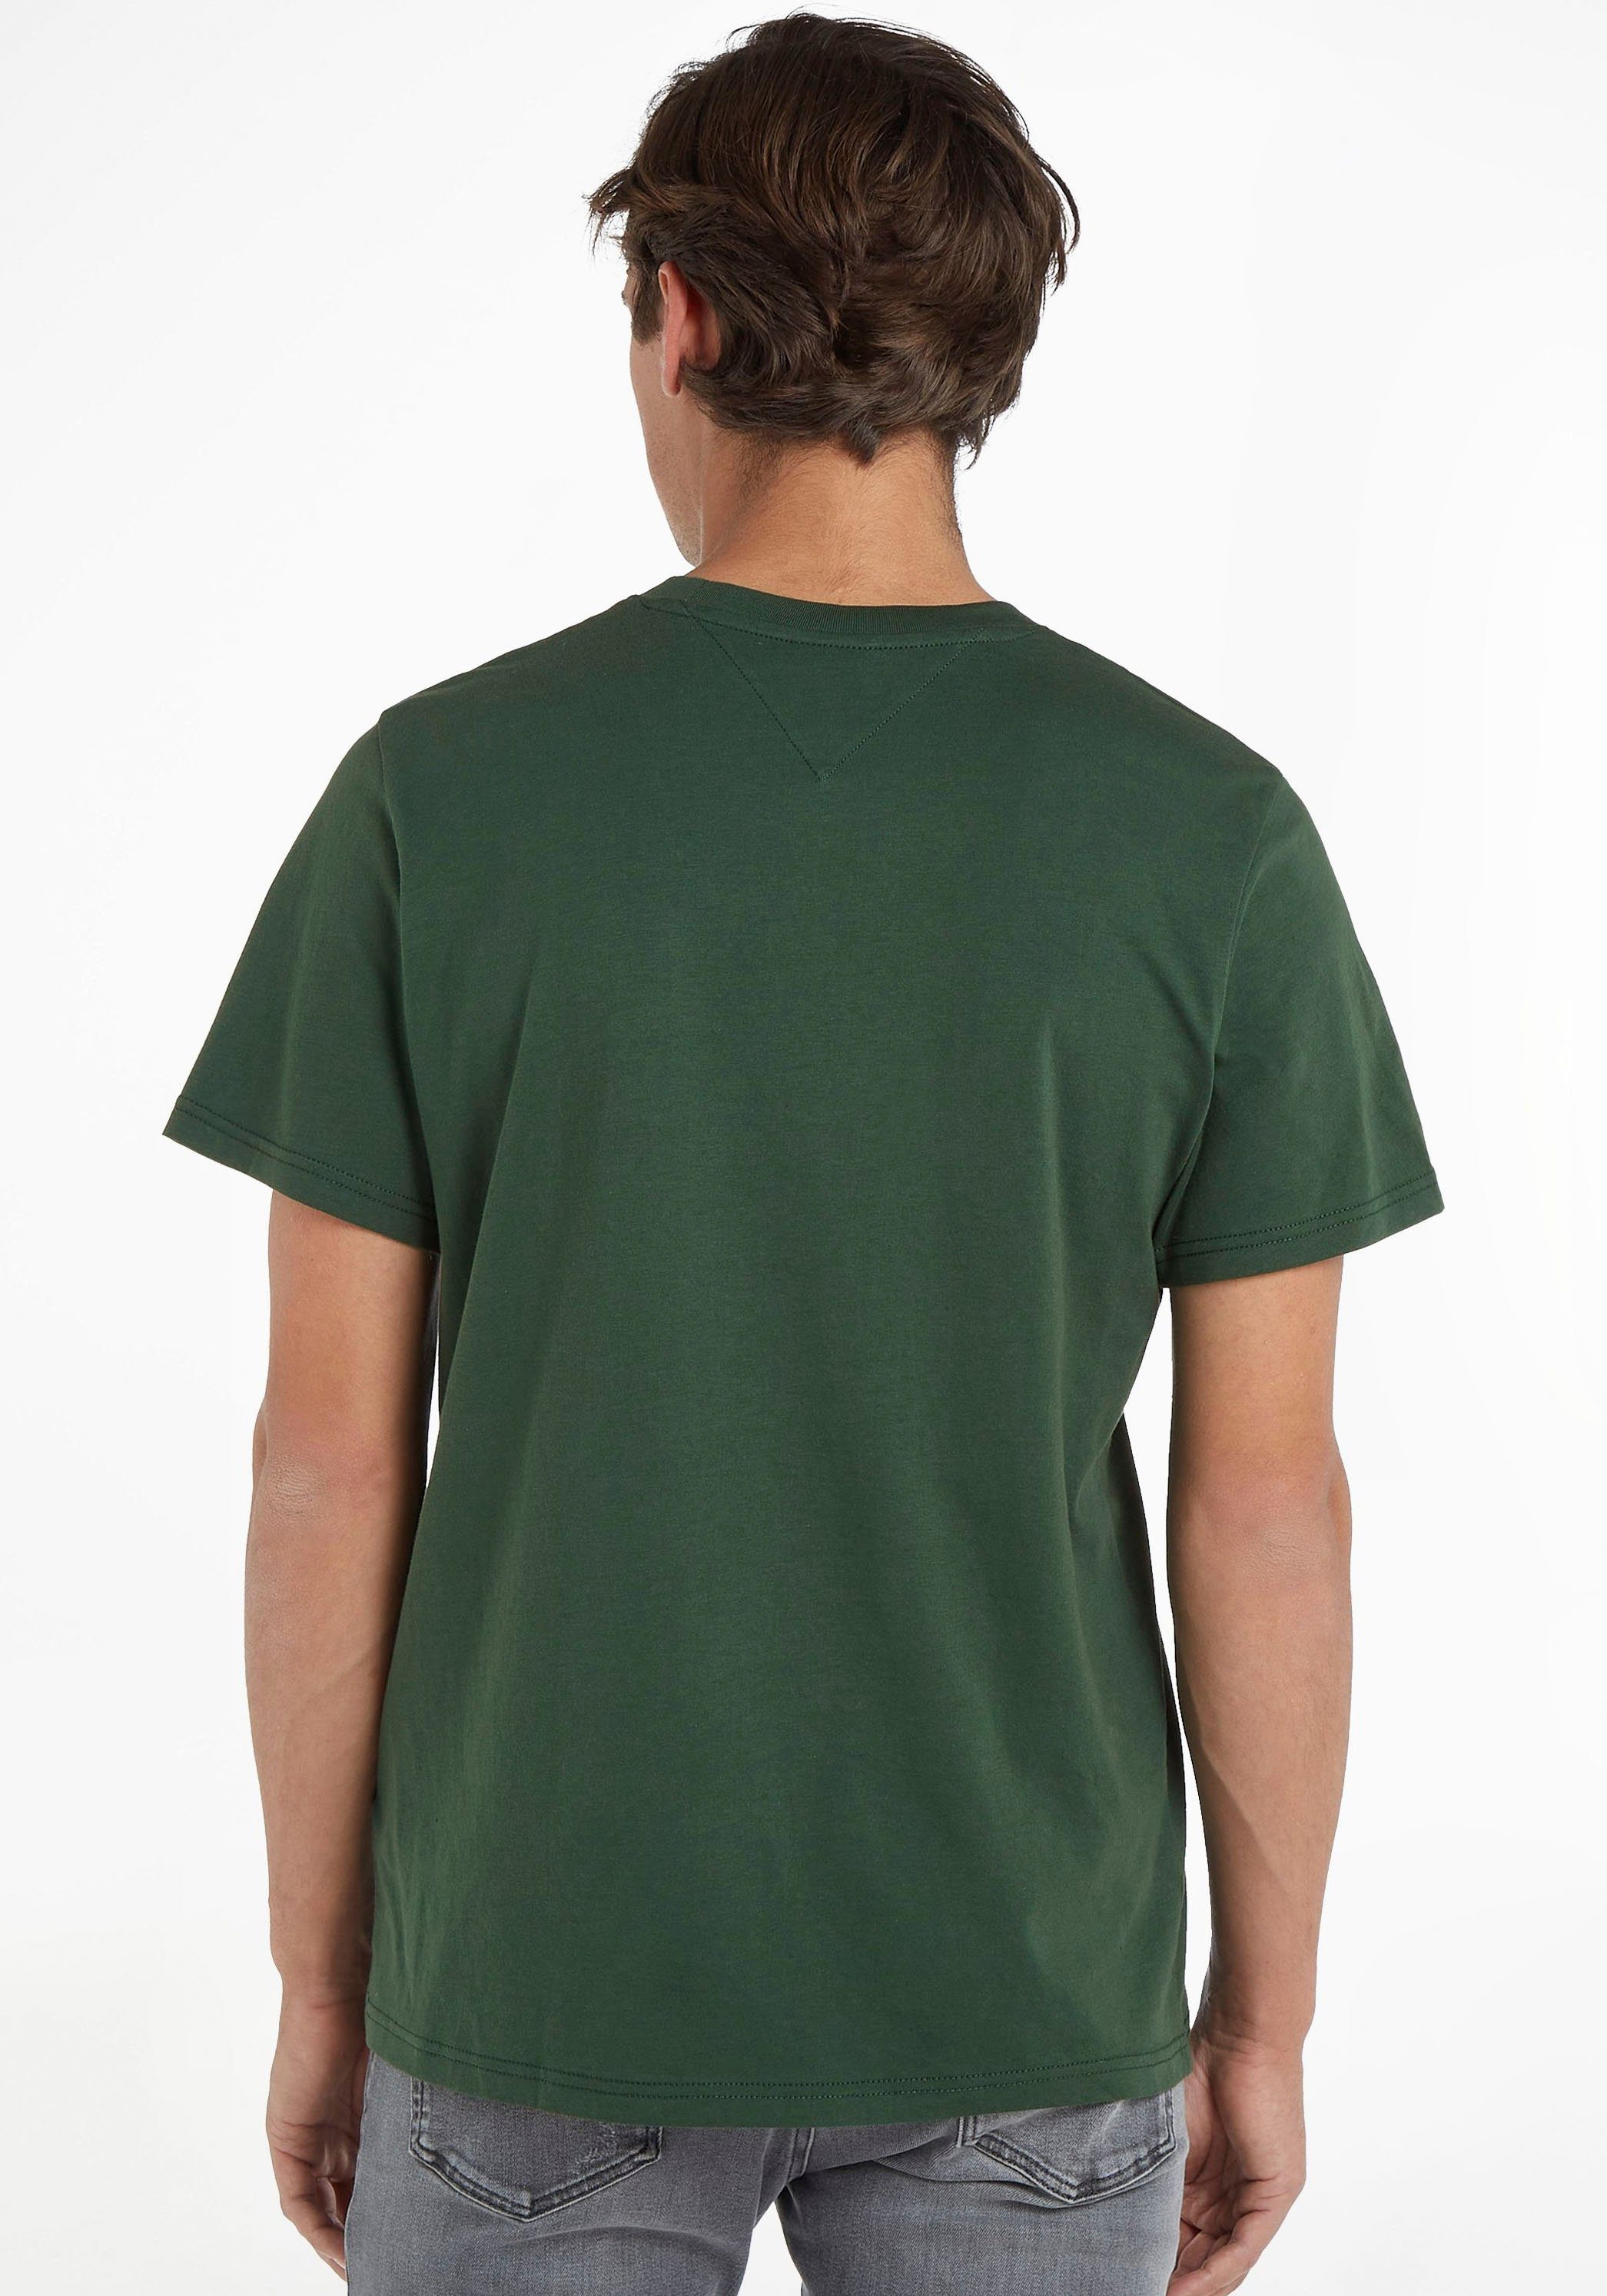 Green TJM Collegiate T-Shirt GRAPHIC Tommy TEE Jeans ENTRY RGLR